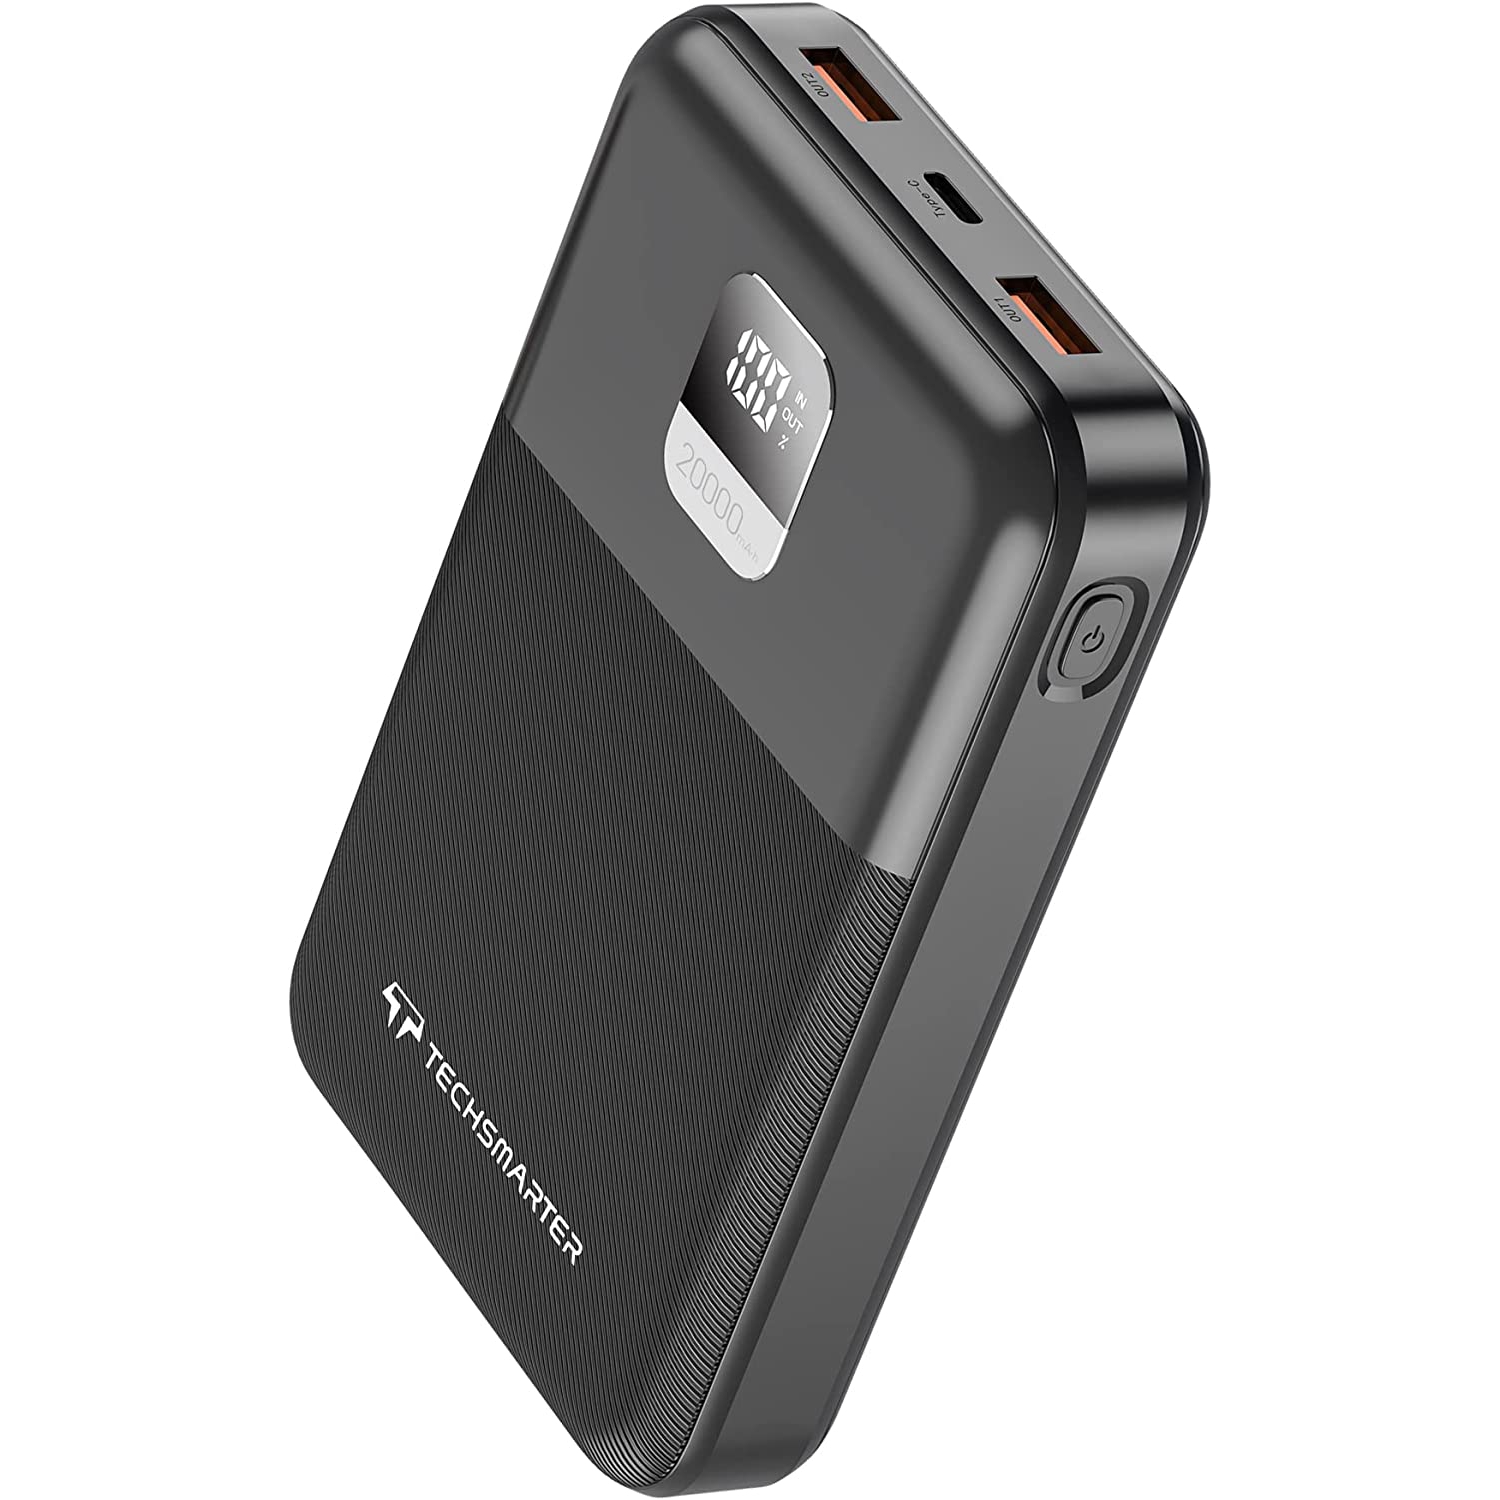 Techsmarter 20000mah 65W USB-C Laptop Power Bank with Samsung Super Fast Charging. Portable Charger Compatible with iPhone, Galaxy, Android, iPad, MacBook, Chromebook, XPS